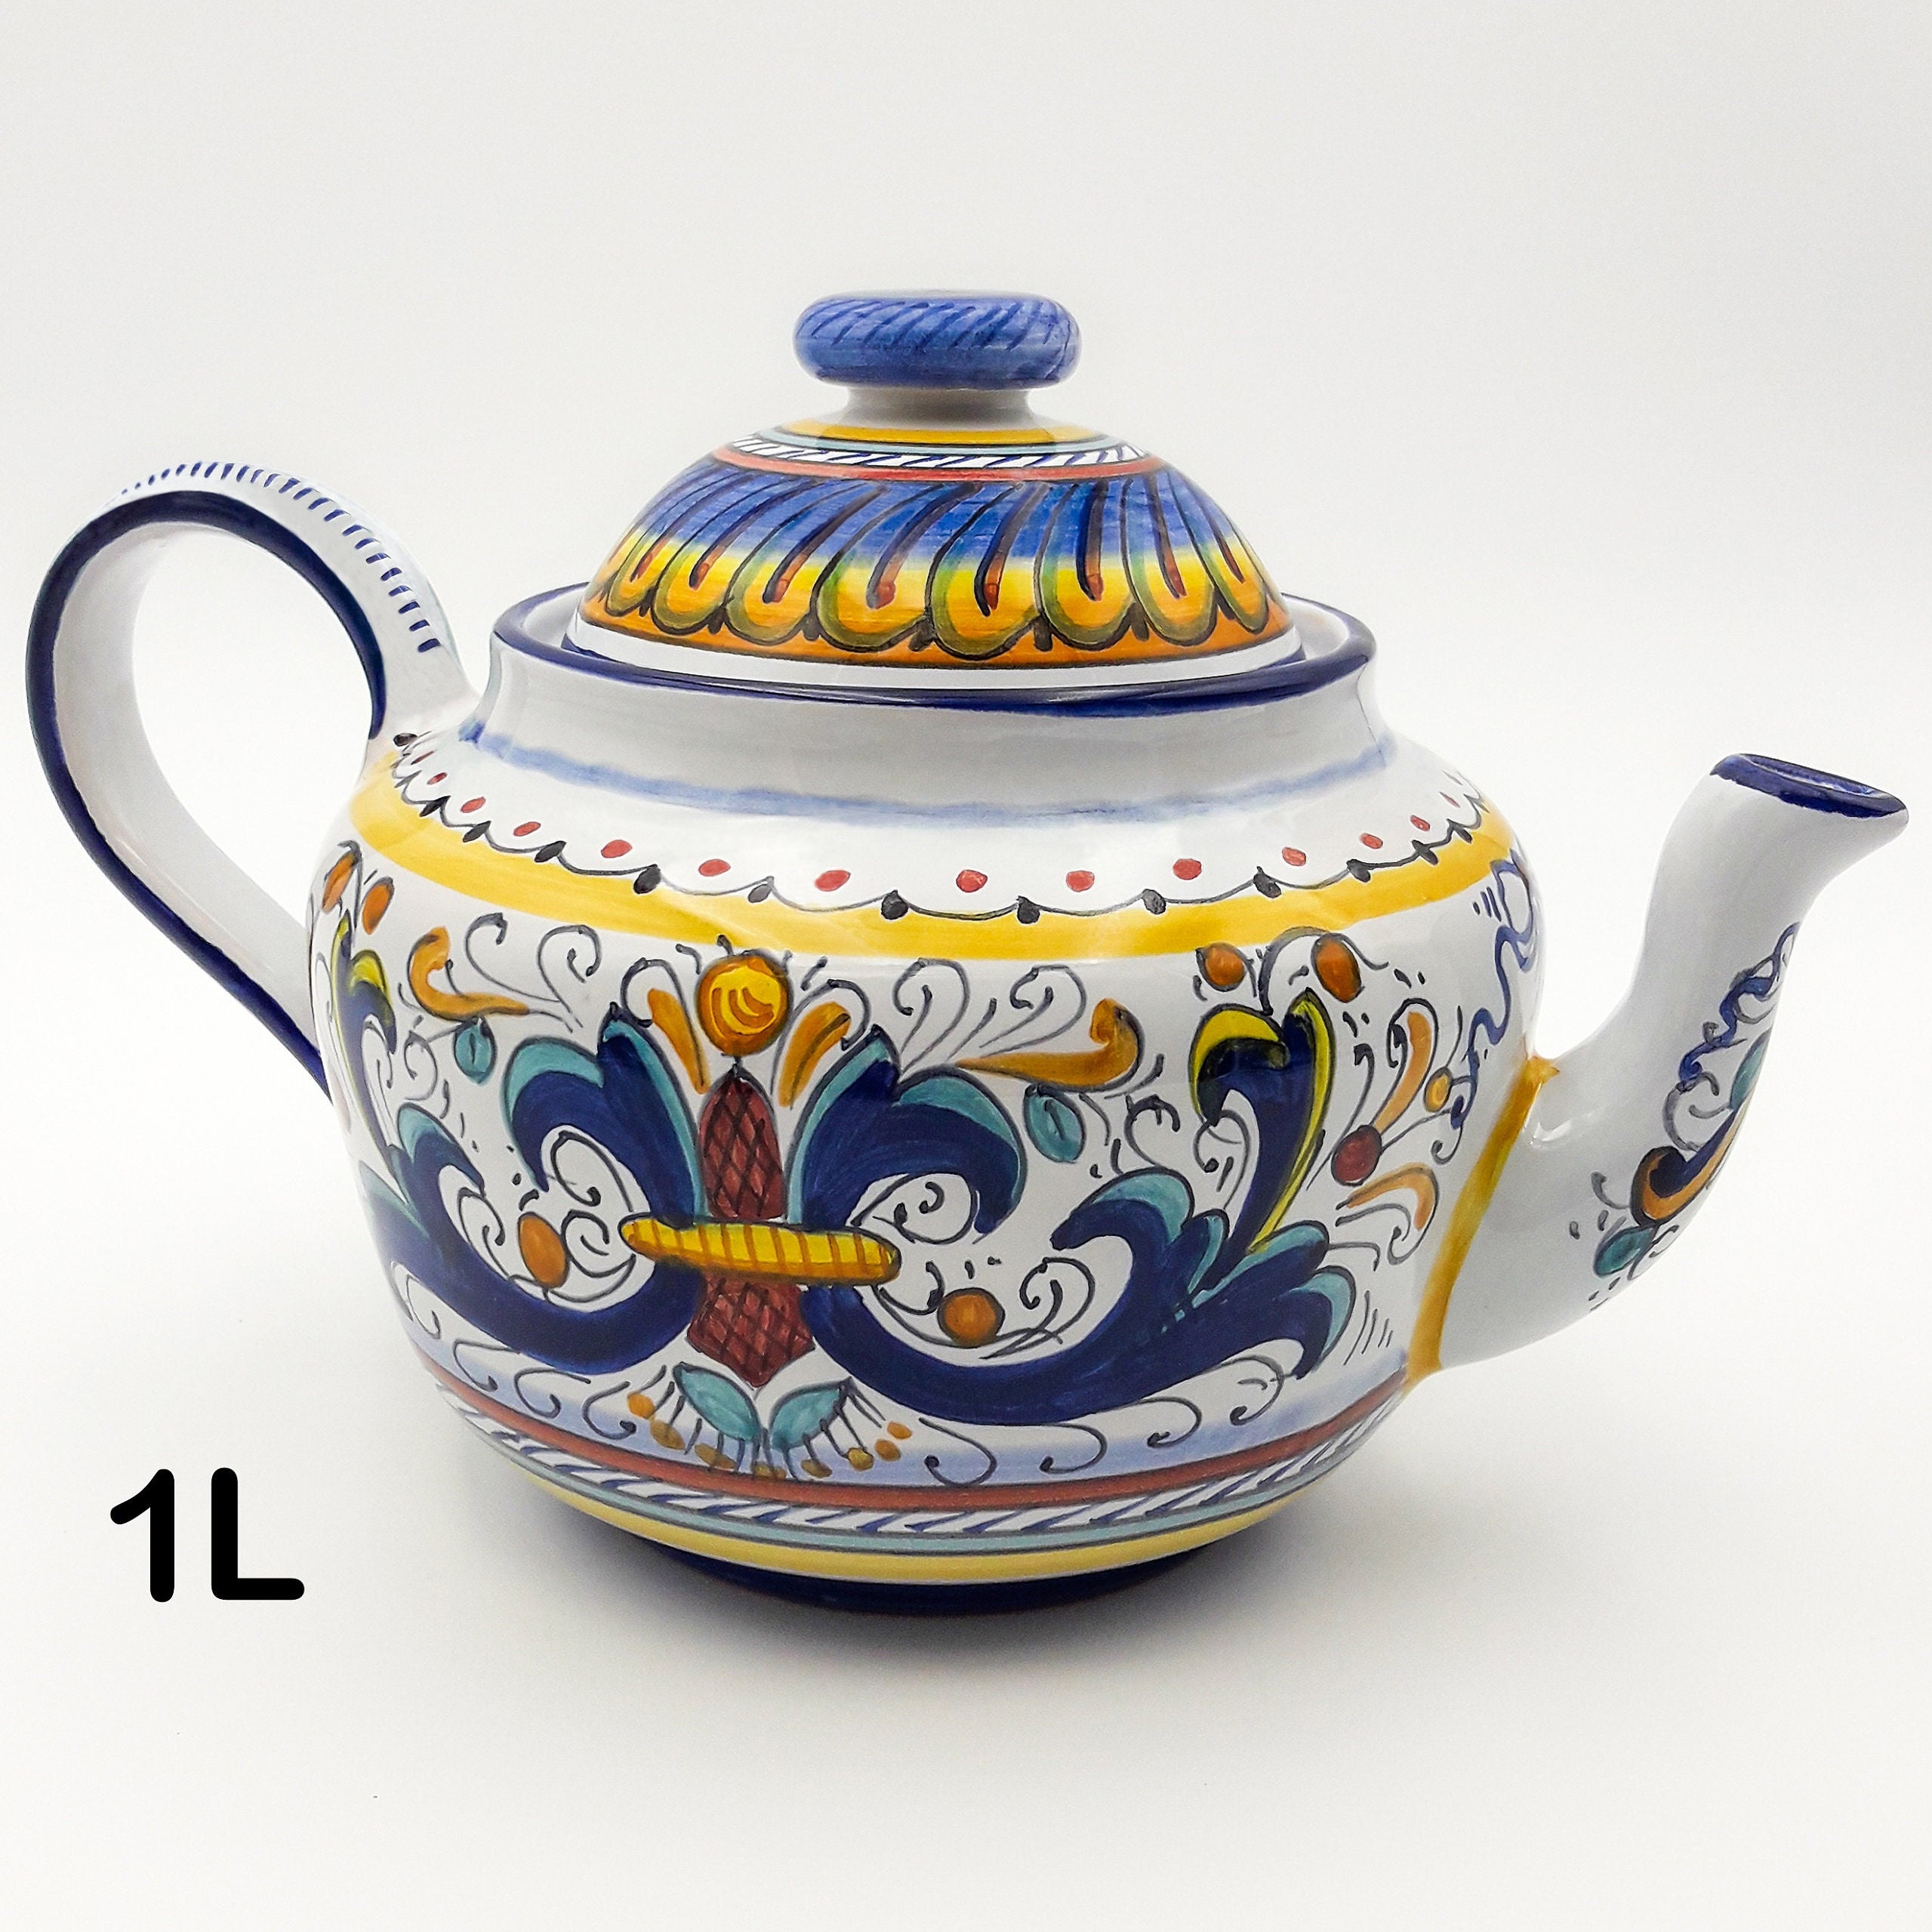 Teapot With Lid 1L 0.5L & 0.25L Decorated in Ricco Classic Deruta. Deruta  Artistic Ceramic. Hand Painted. MADE IN ITALY. -  Denmark